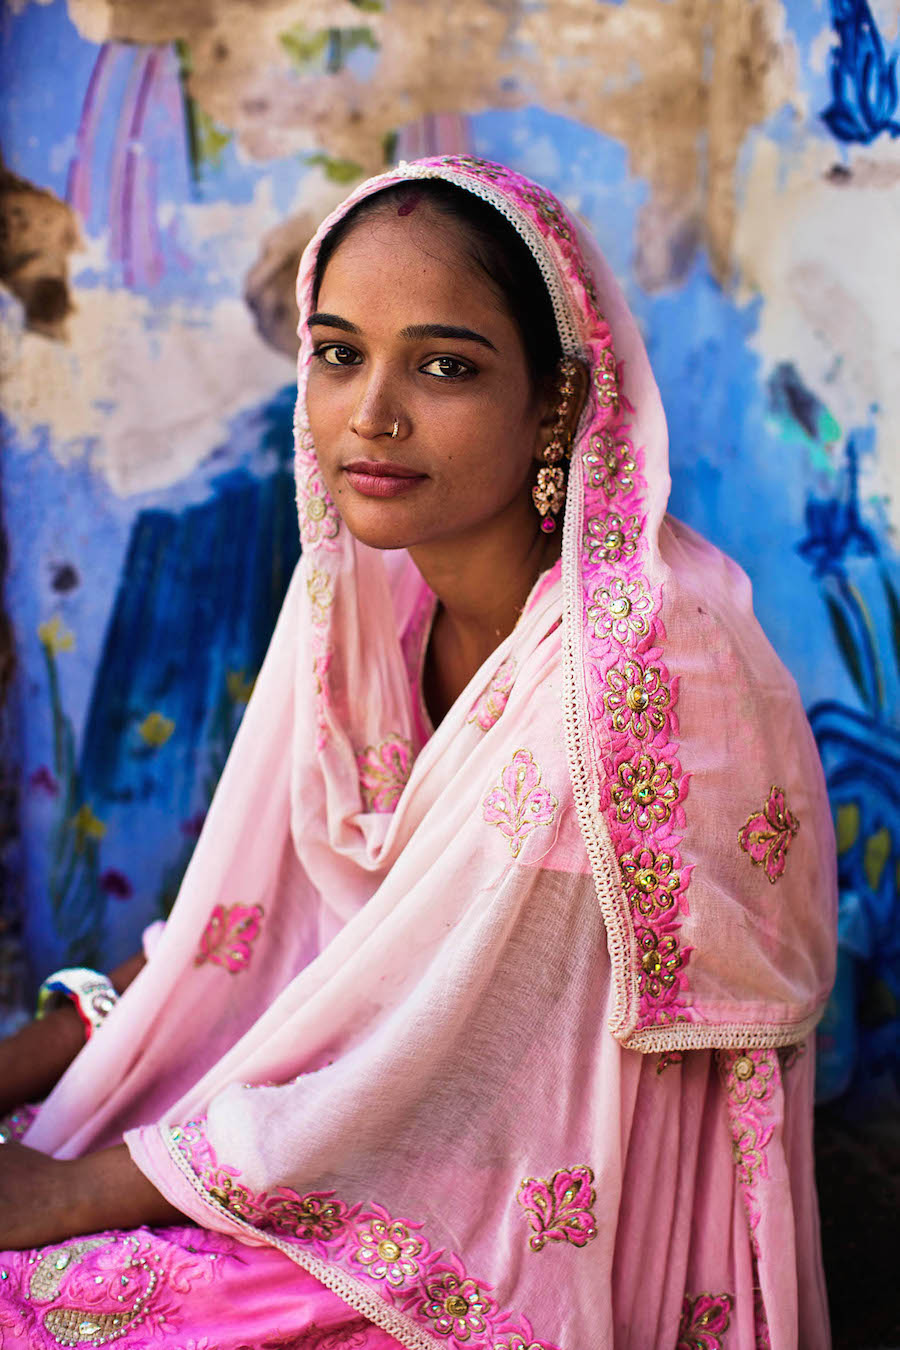 Captivating portraits of Indian women show beauty